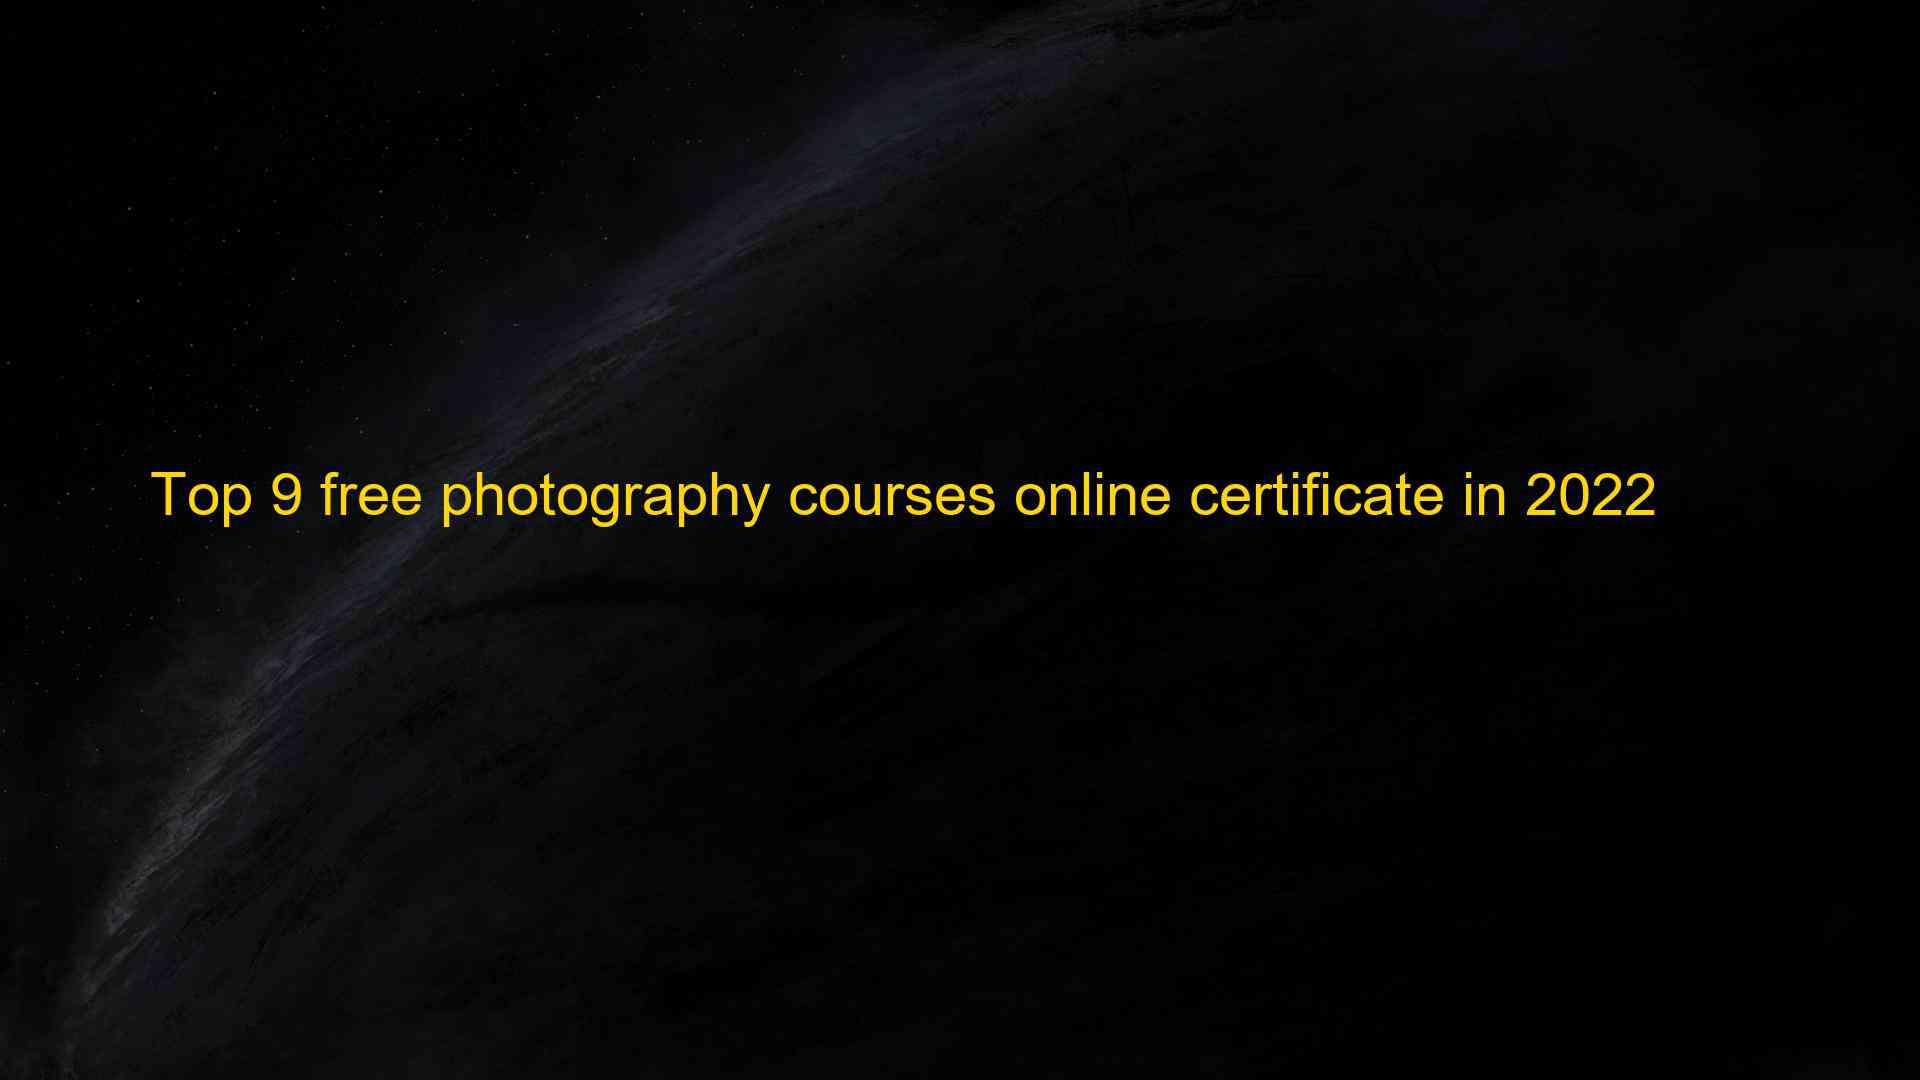 Top 9 free photography courses online certificate in 2022 1661924649